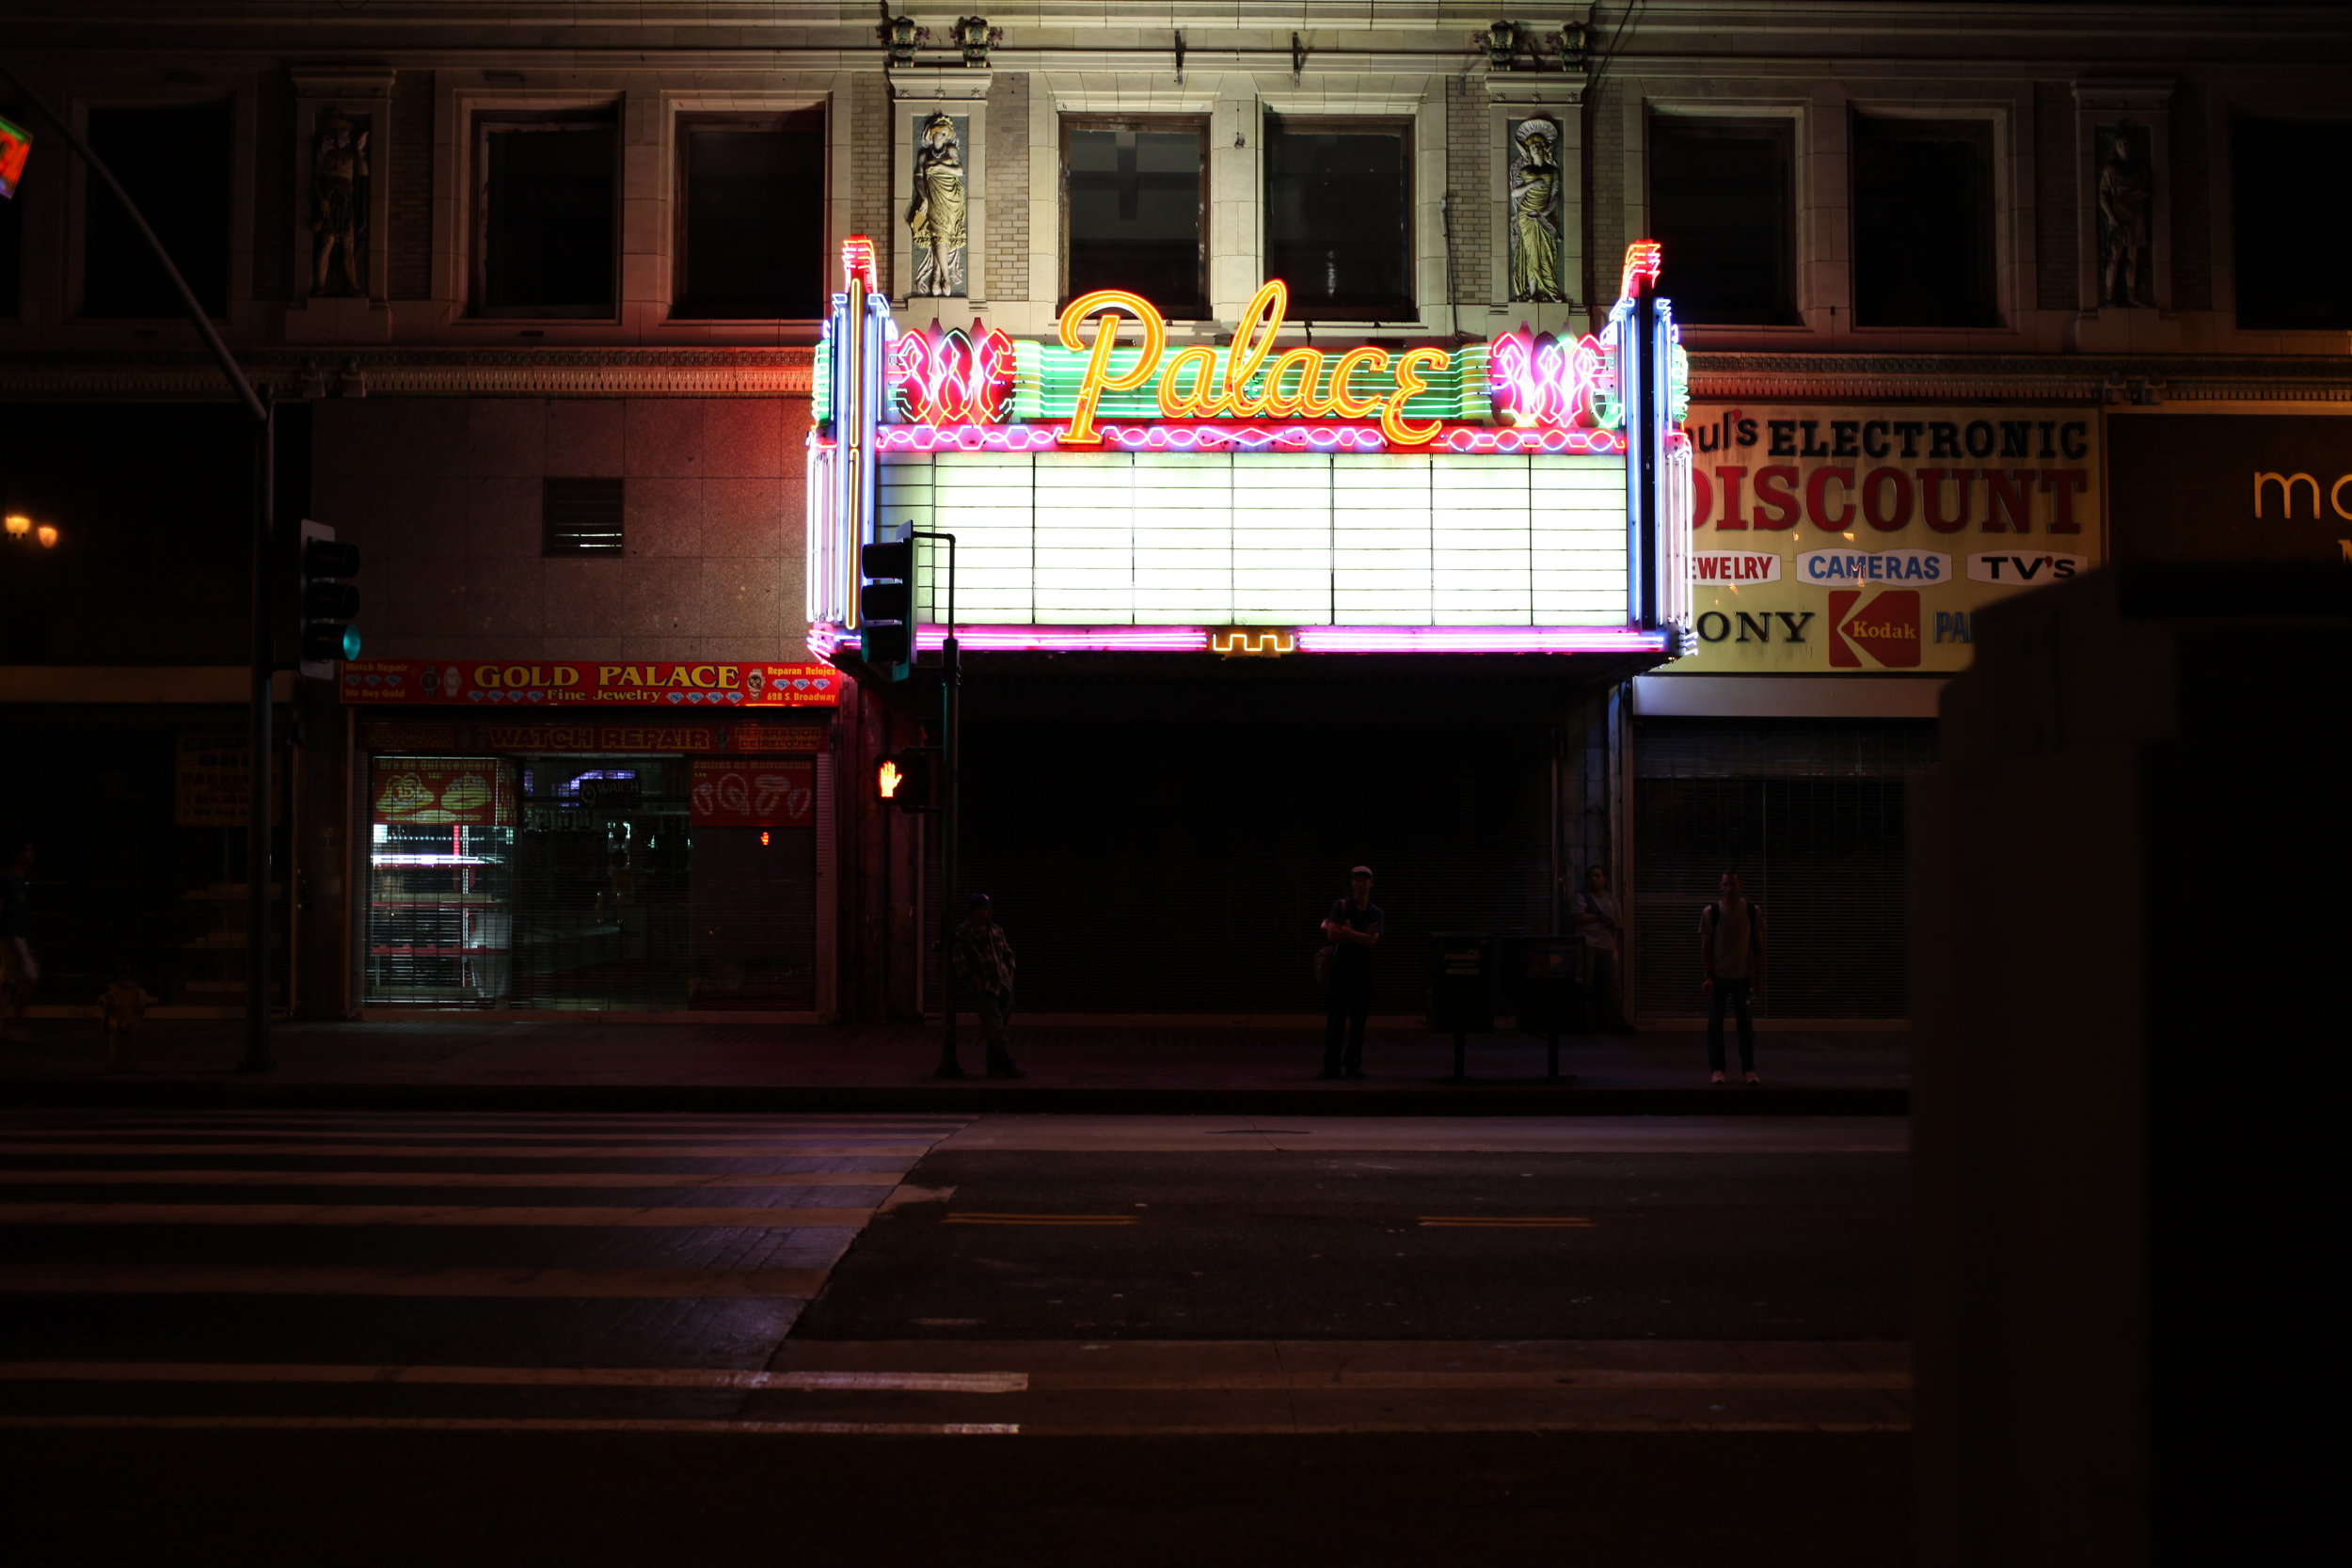  Palace Theatre, S Broadway, Los Angeles, 2014 